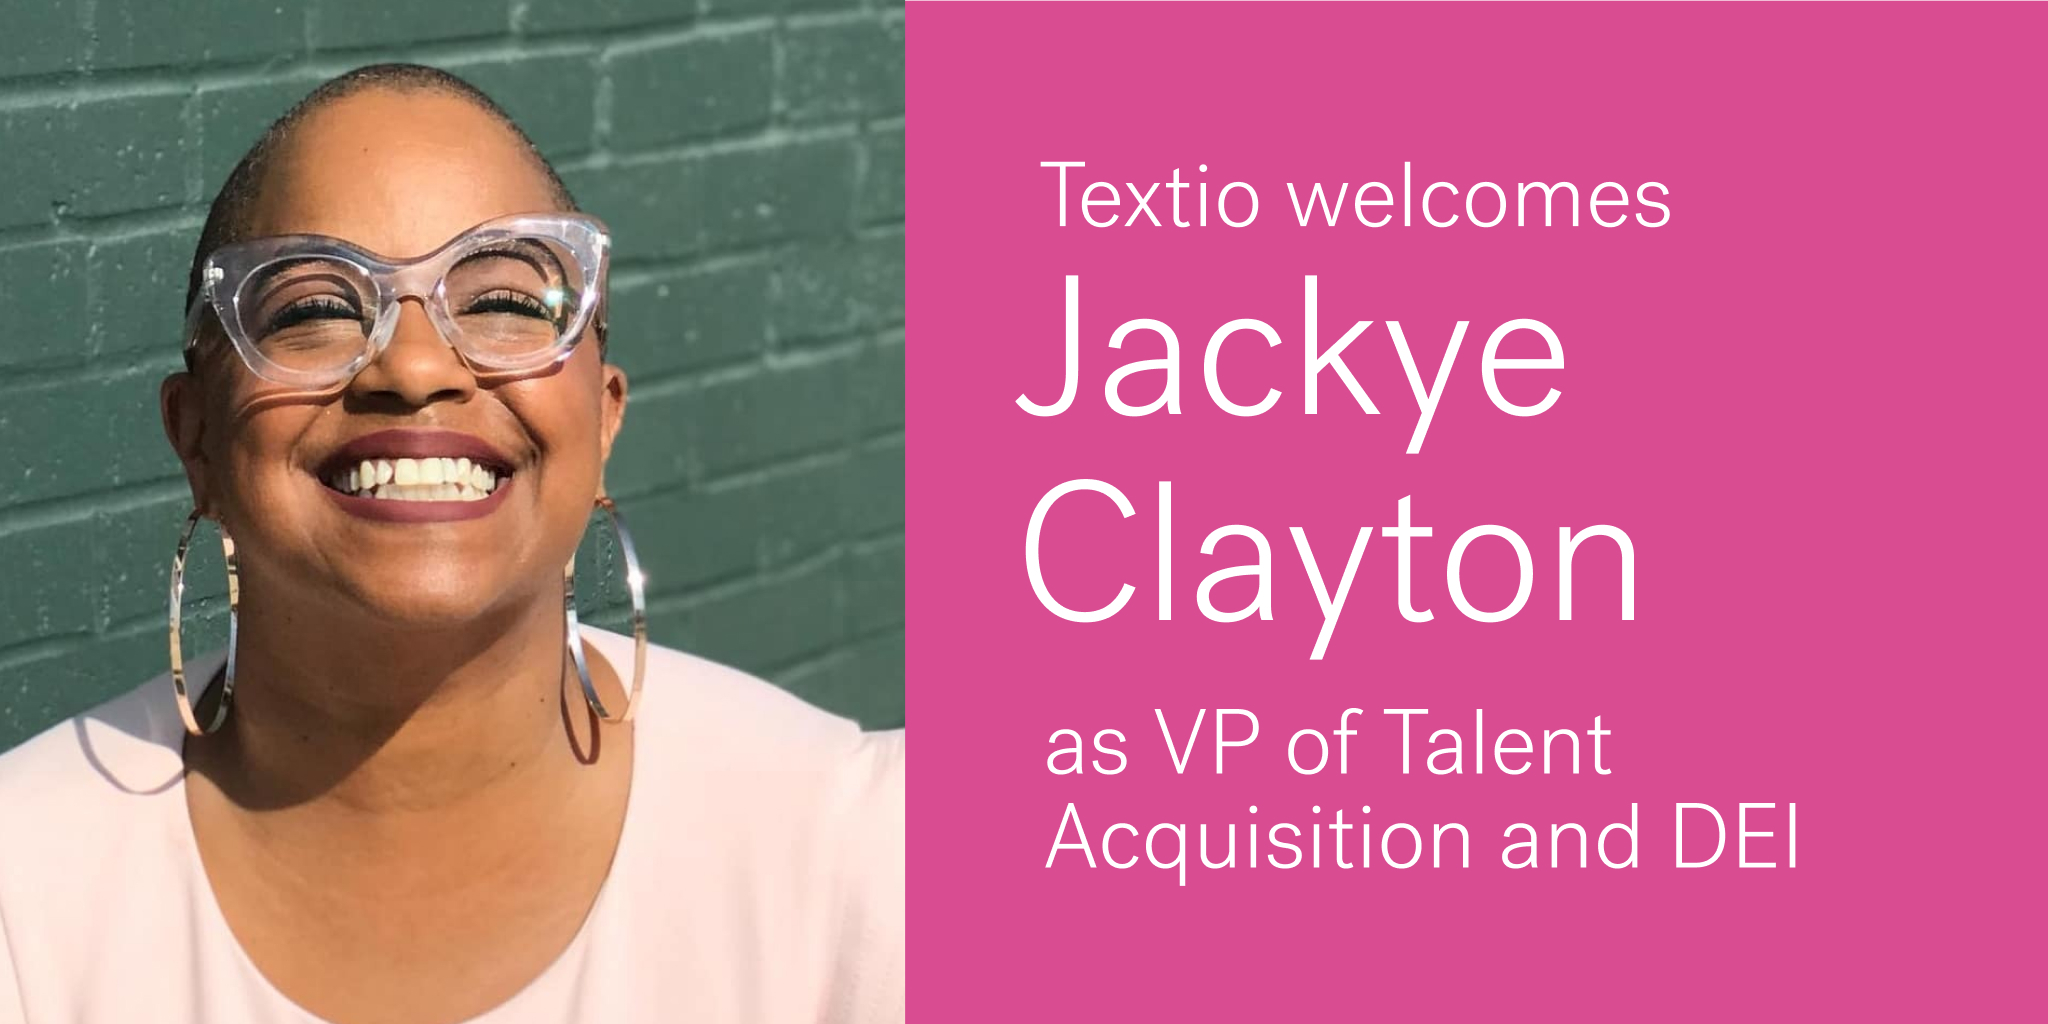 lockup of headshot of Jackye Clayton and the words "Textio welcomes Jackye Clayton as VP of Talent Acquisition and DEI" on pink background